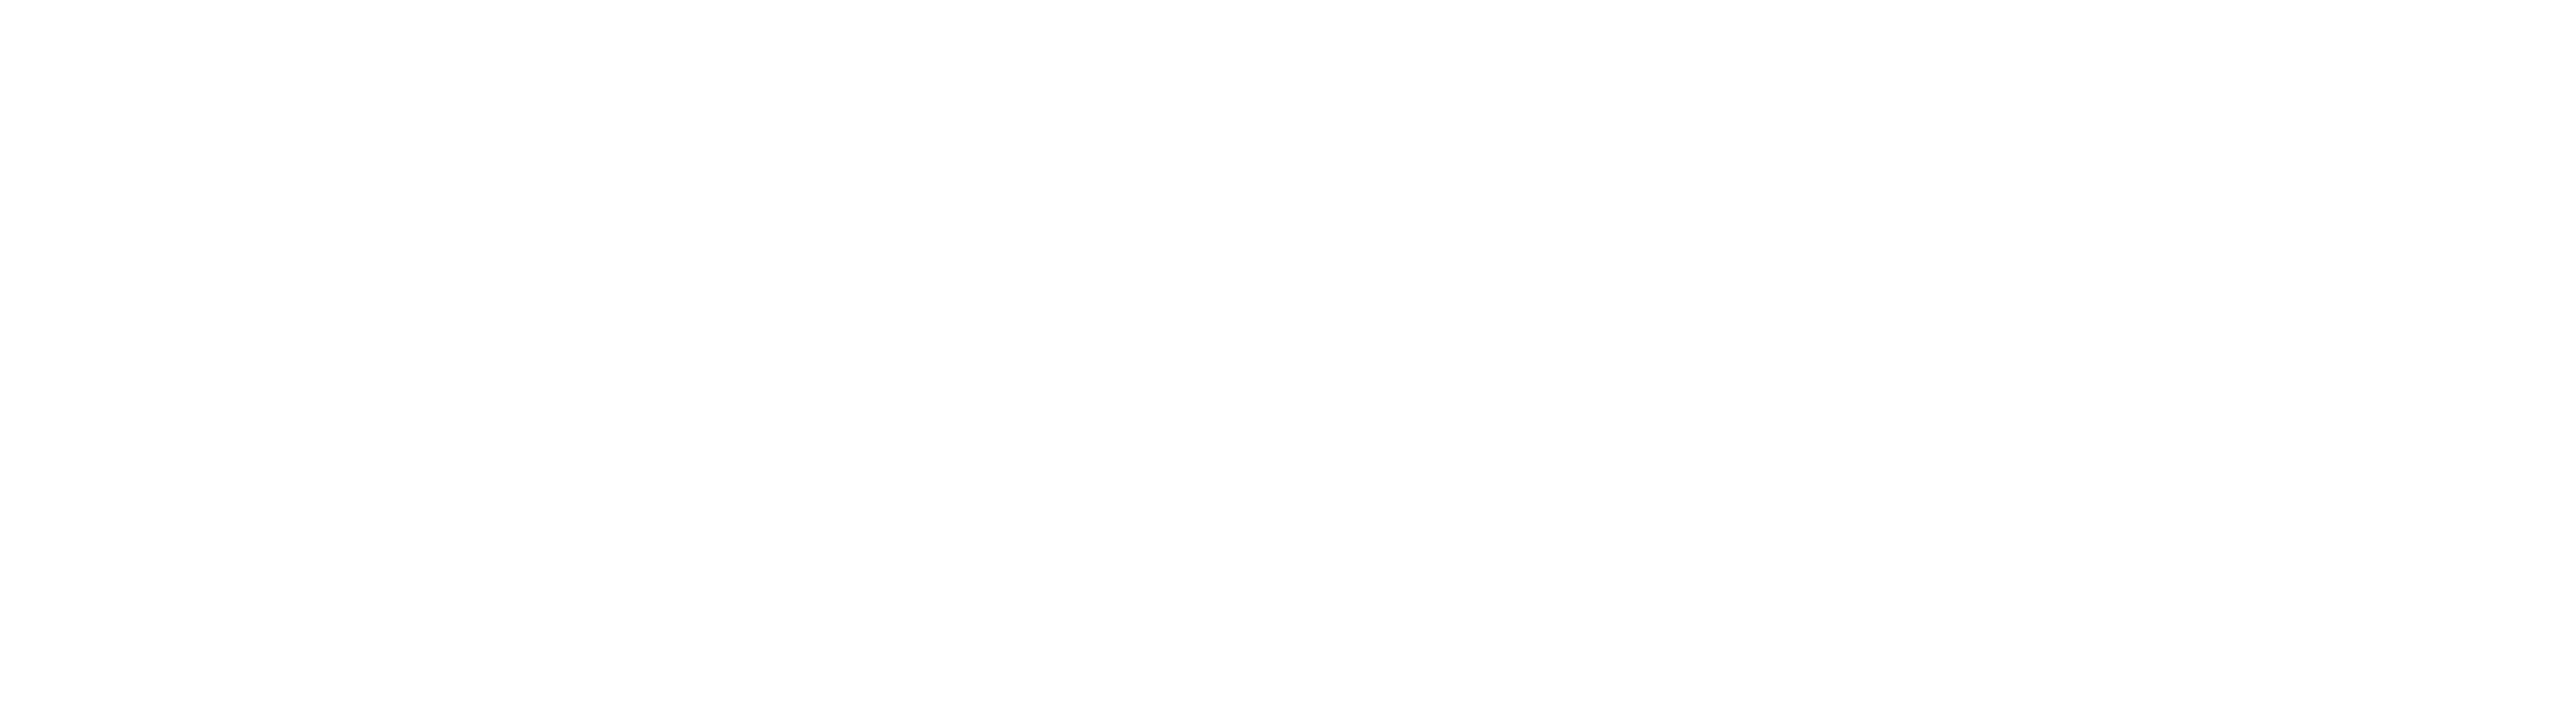 Download (1.9MB) Interweave Solutions logo, horizontal style, white color, in the Adobe Illustrator format (.ai)